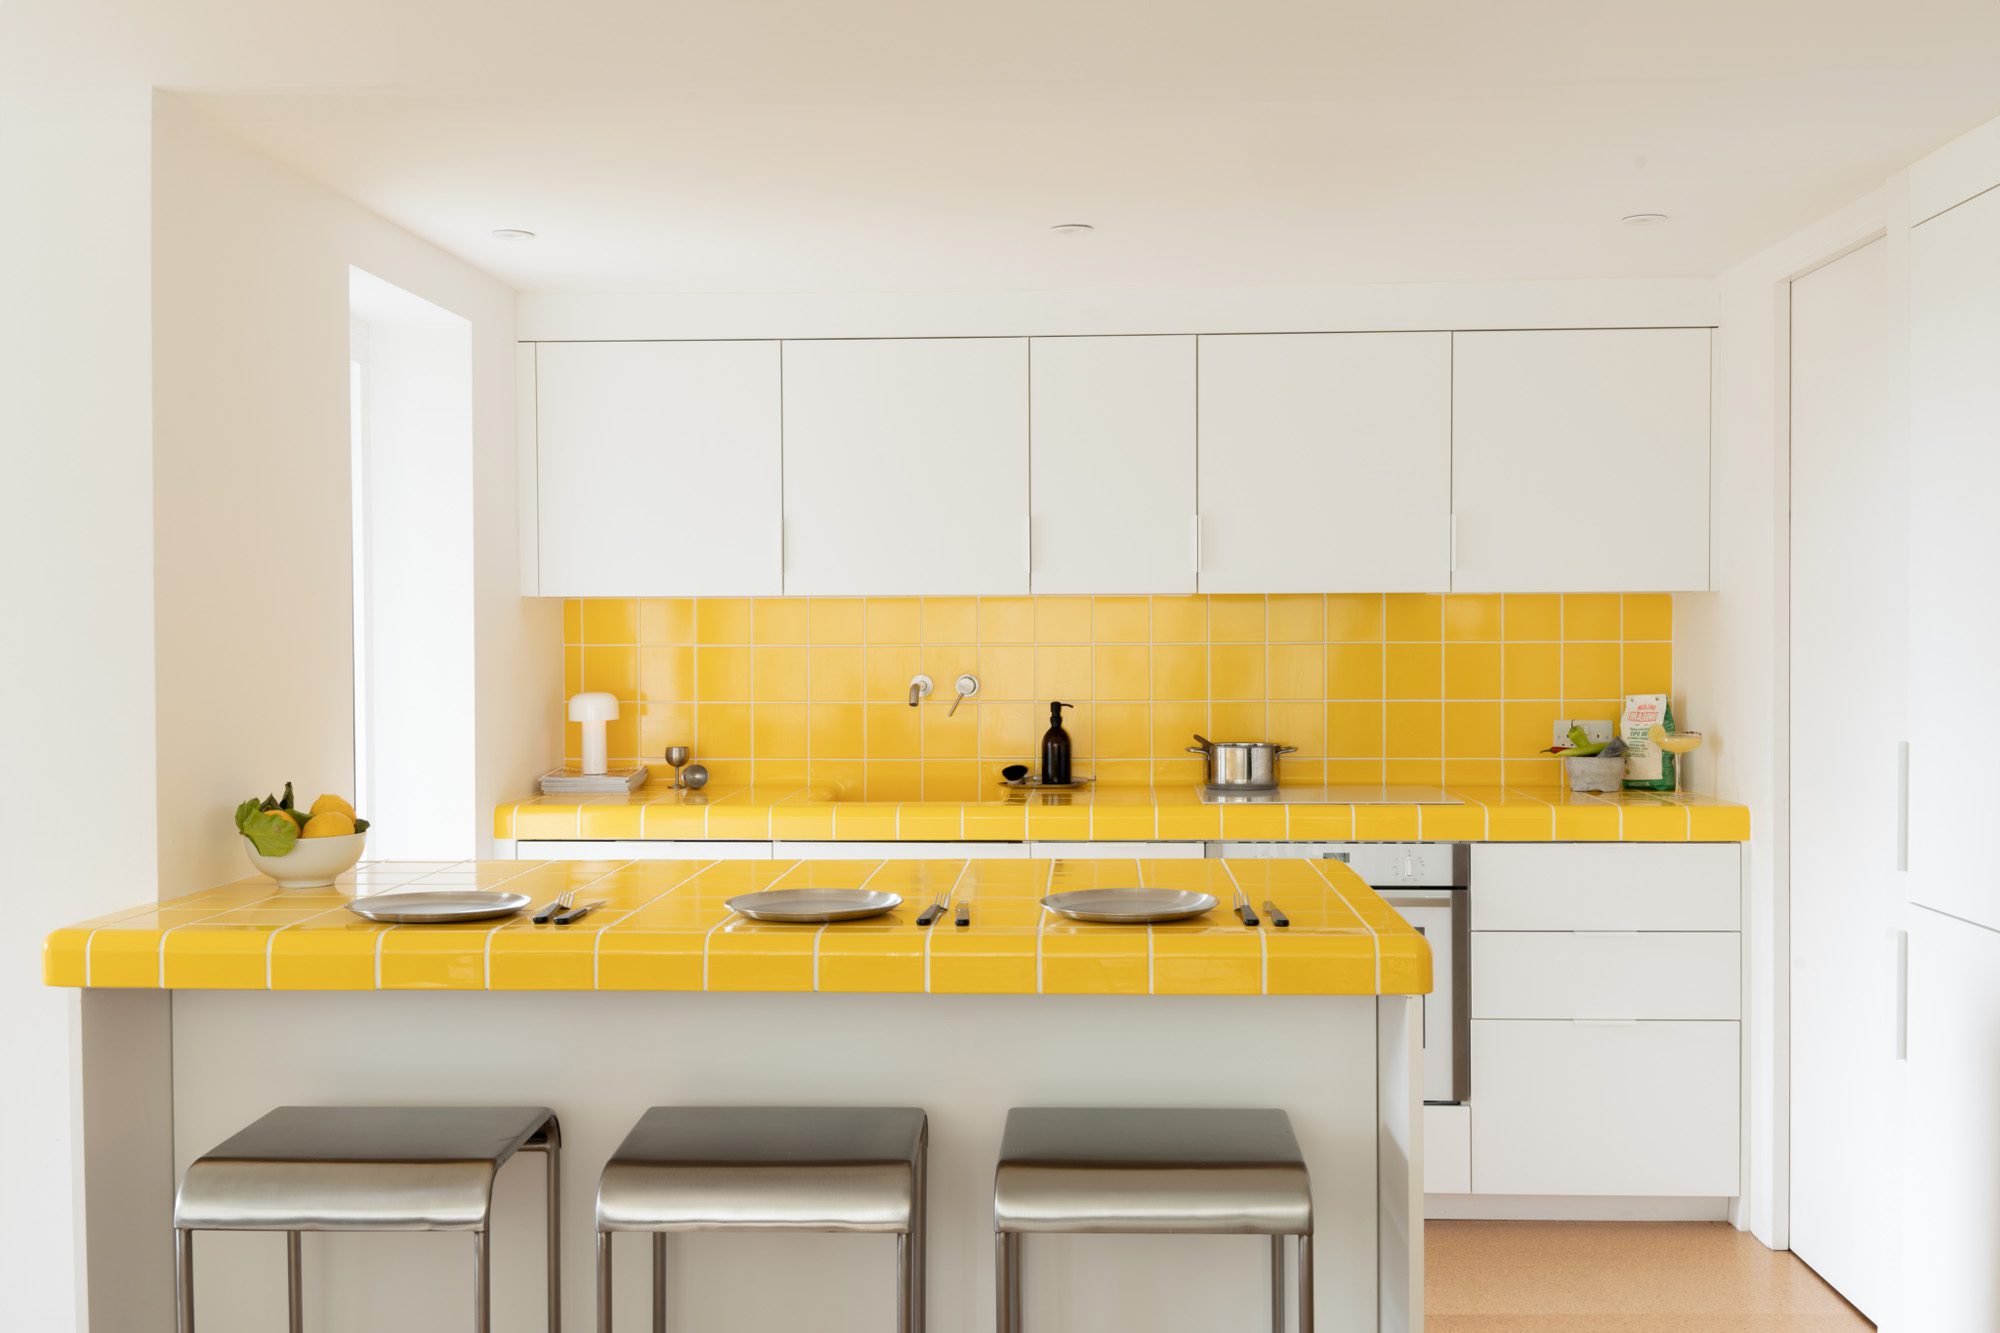 HUSK's Westmoreland Road Kitchen, featuring FENIX® Fronts in Bianco Kos and Yellow DTile® Curved Tiles